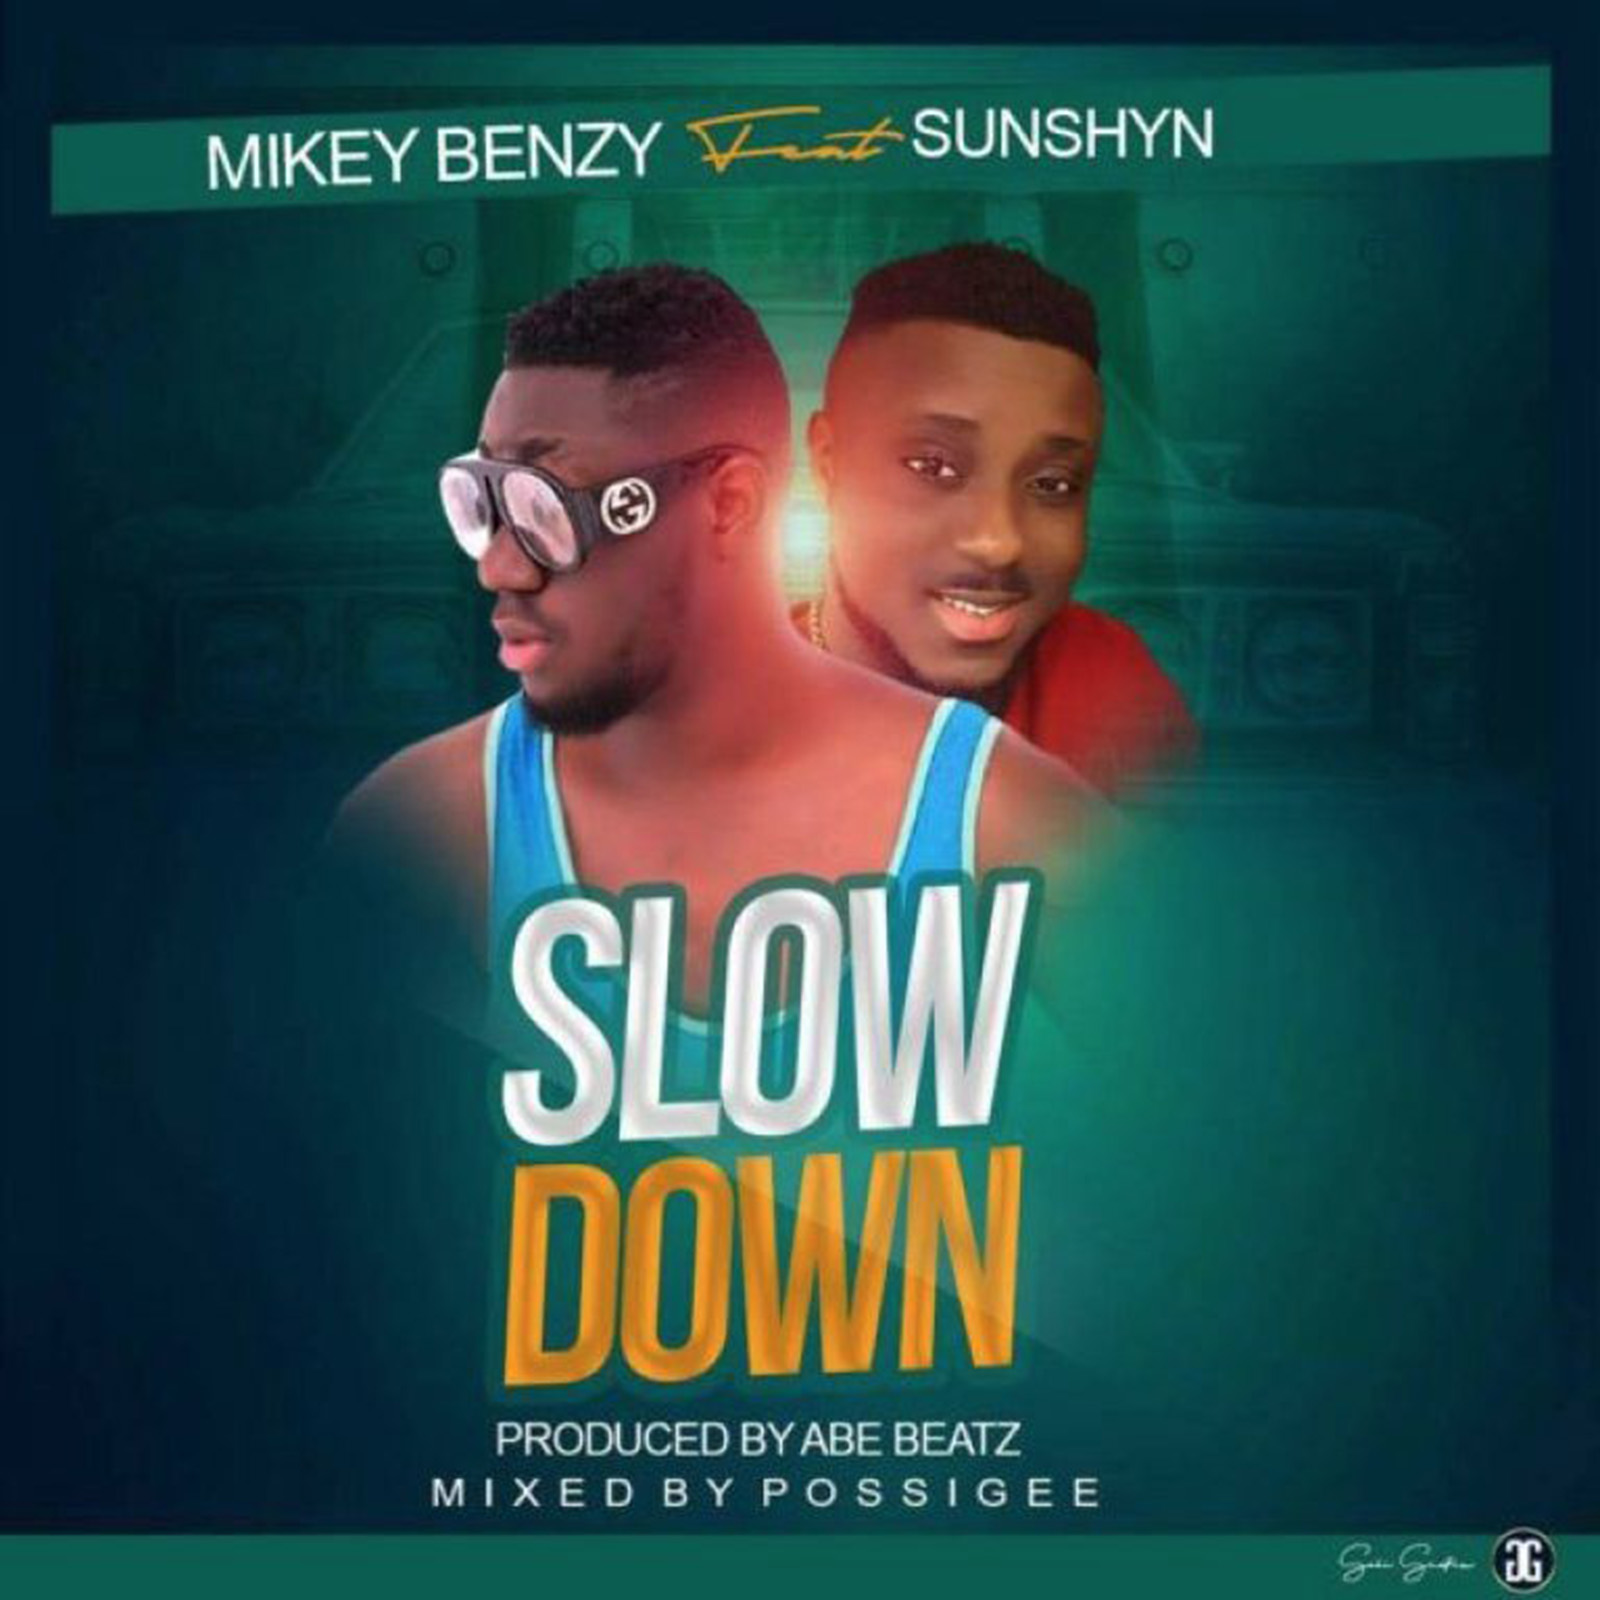 Slow Down by Mike Benzy feat. Sunshyn